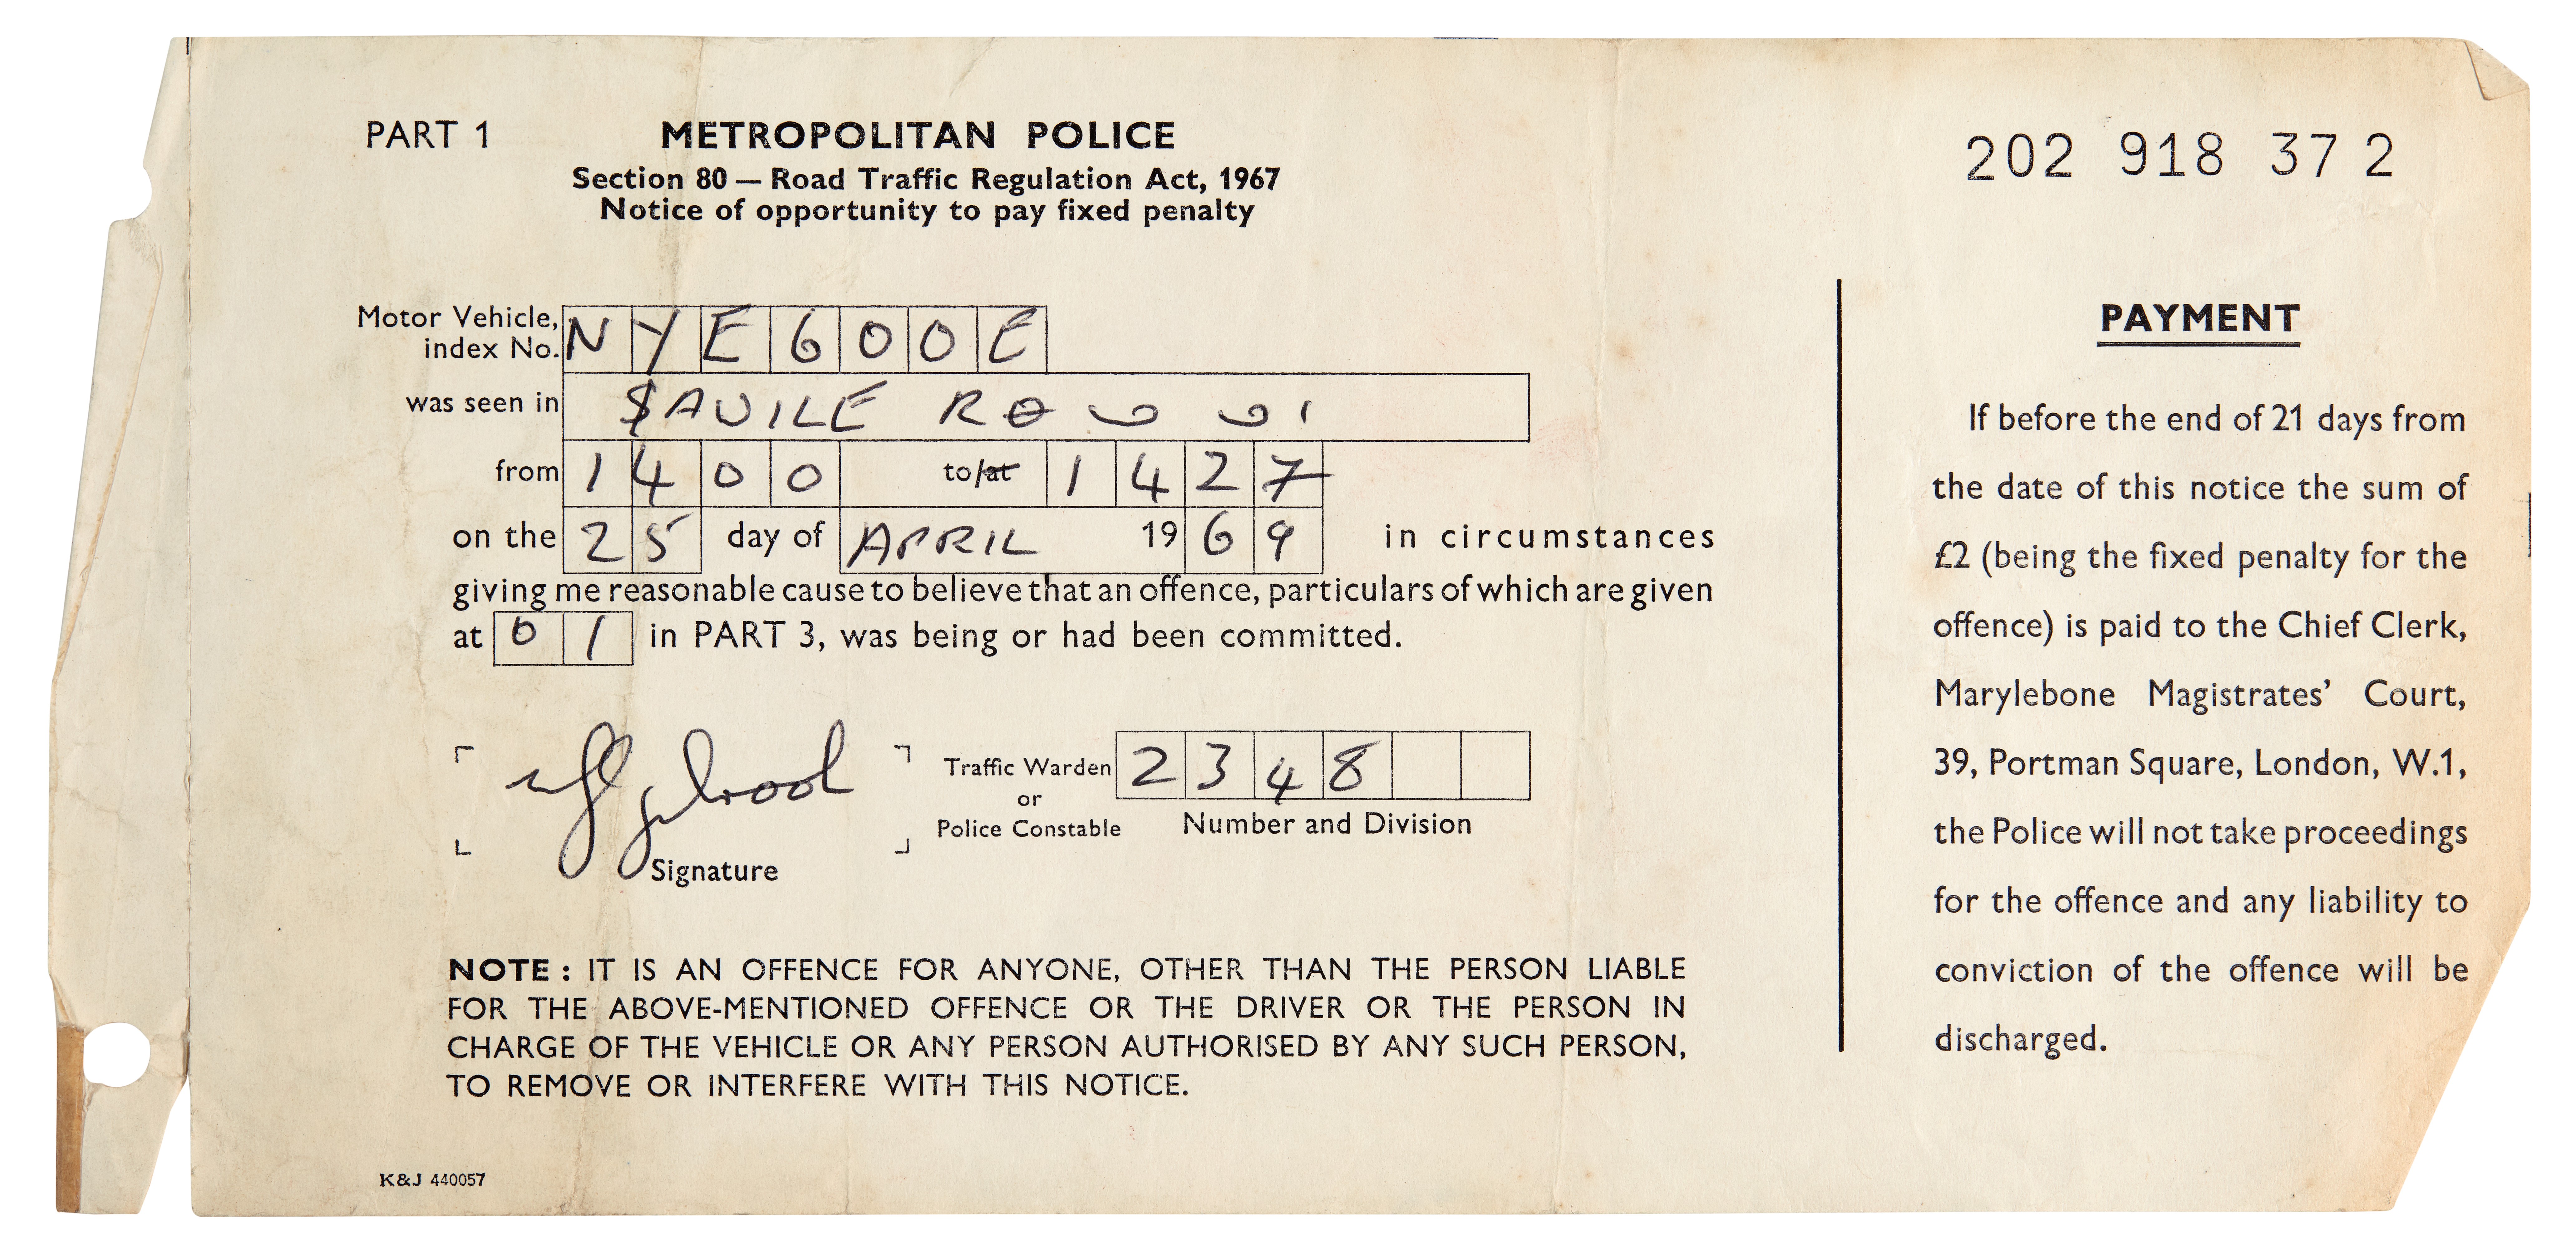 A parking ticket issued to Ringo Starr